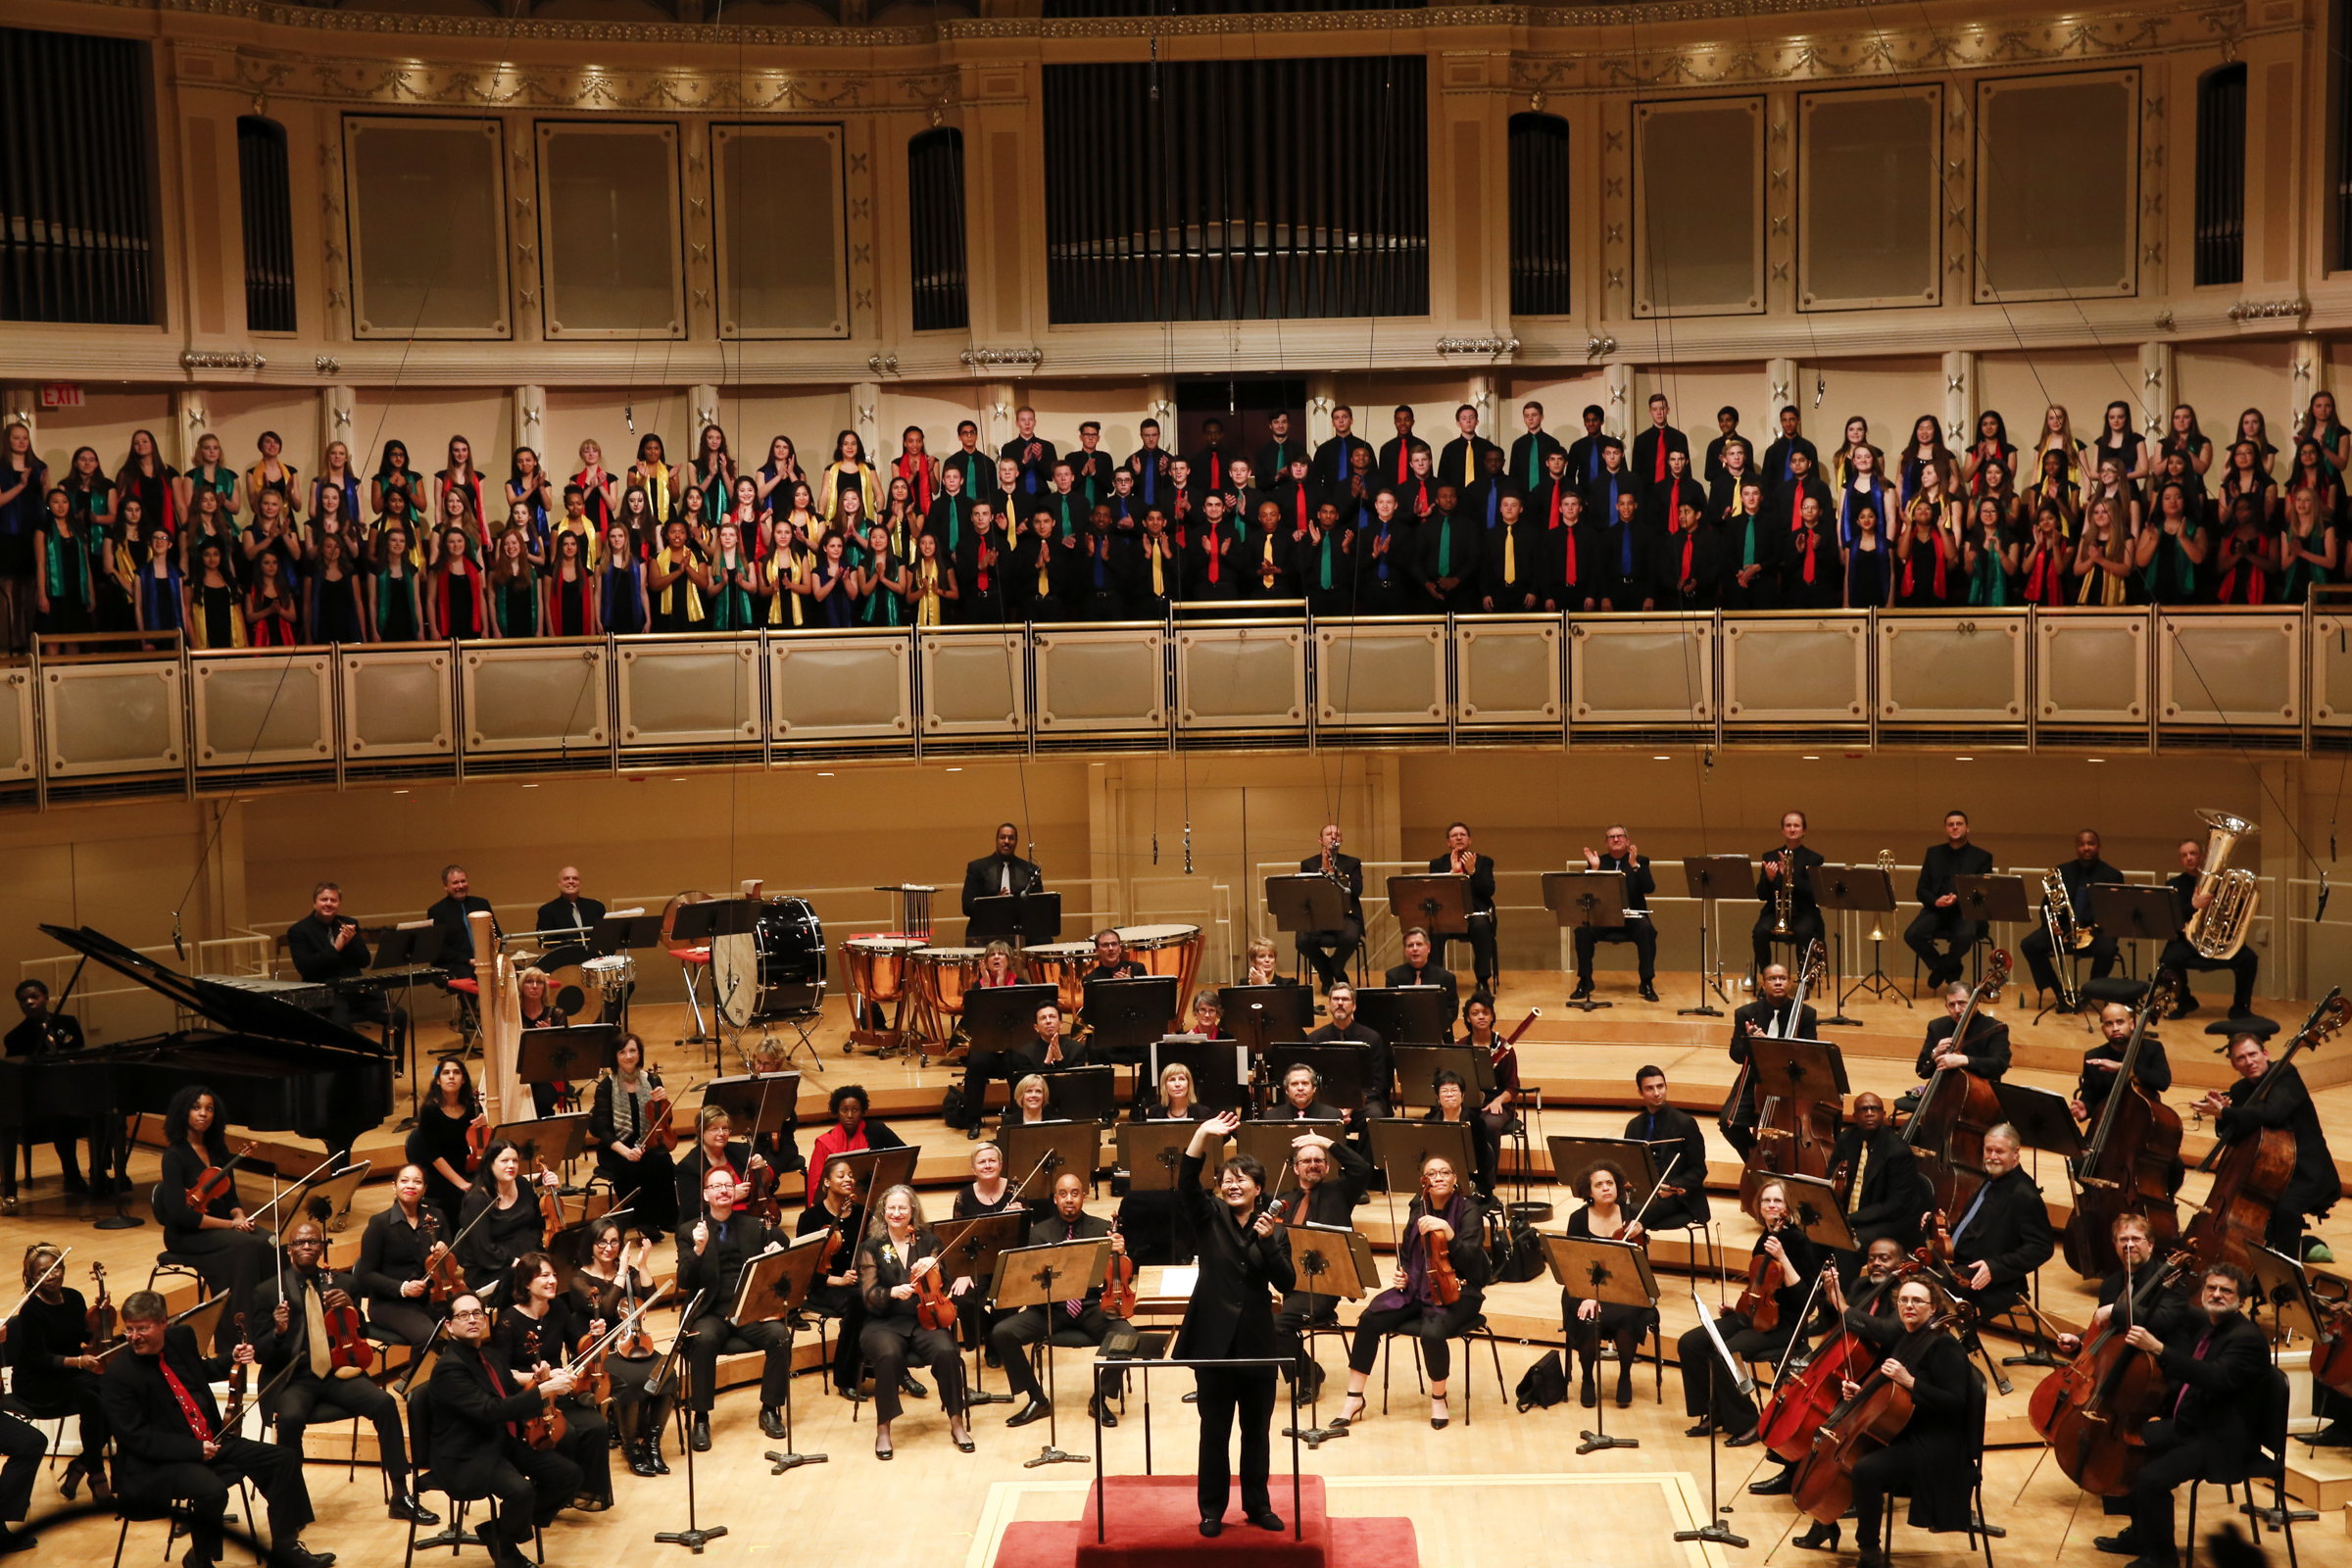 The Chicago Sinfonietta performs it's annual tribute to MLK at Symphony Center on Monday, January 19th, 2015. Photo by Jasmin Shah